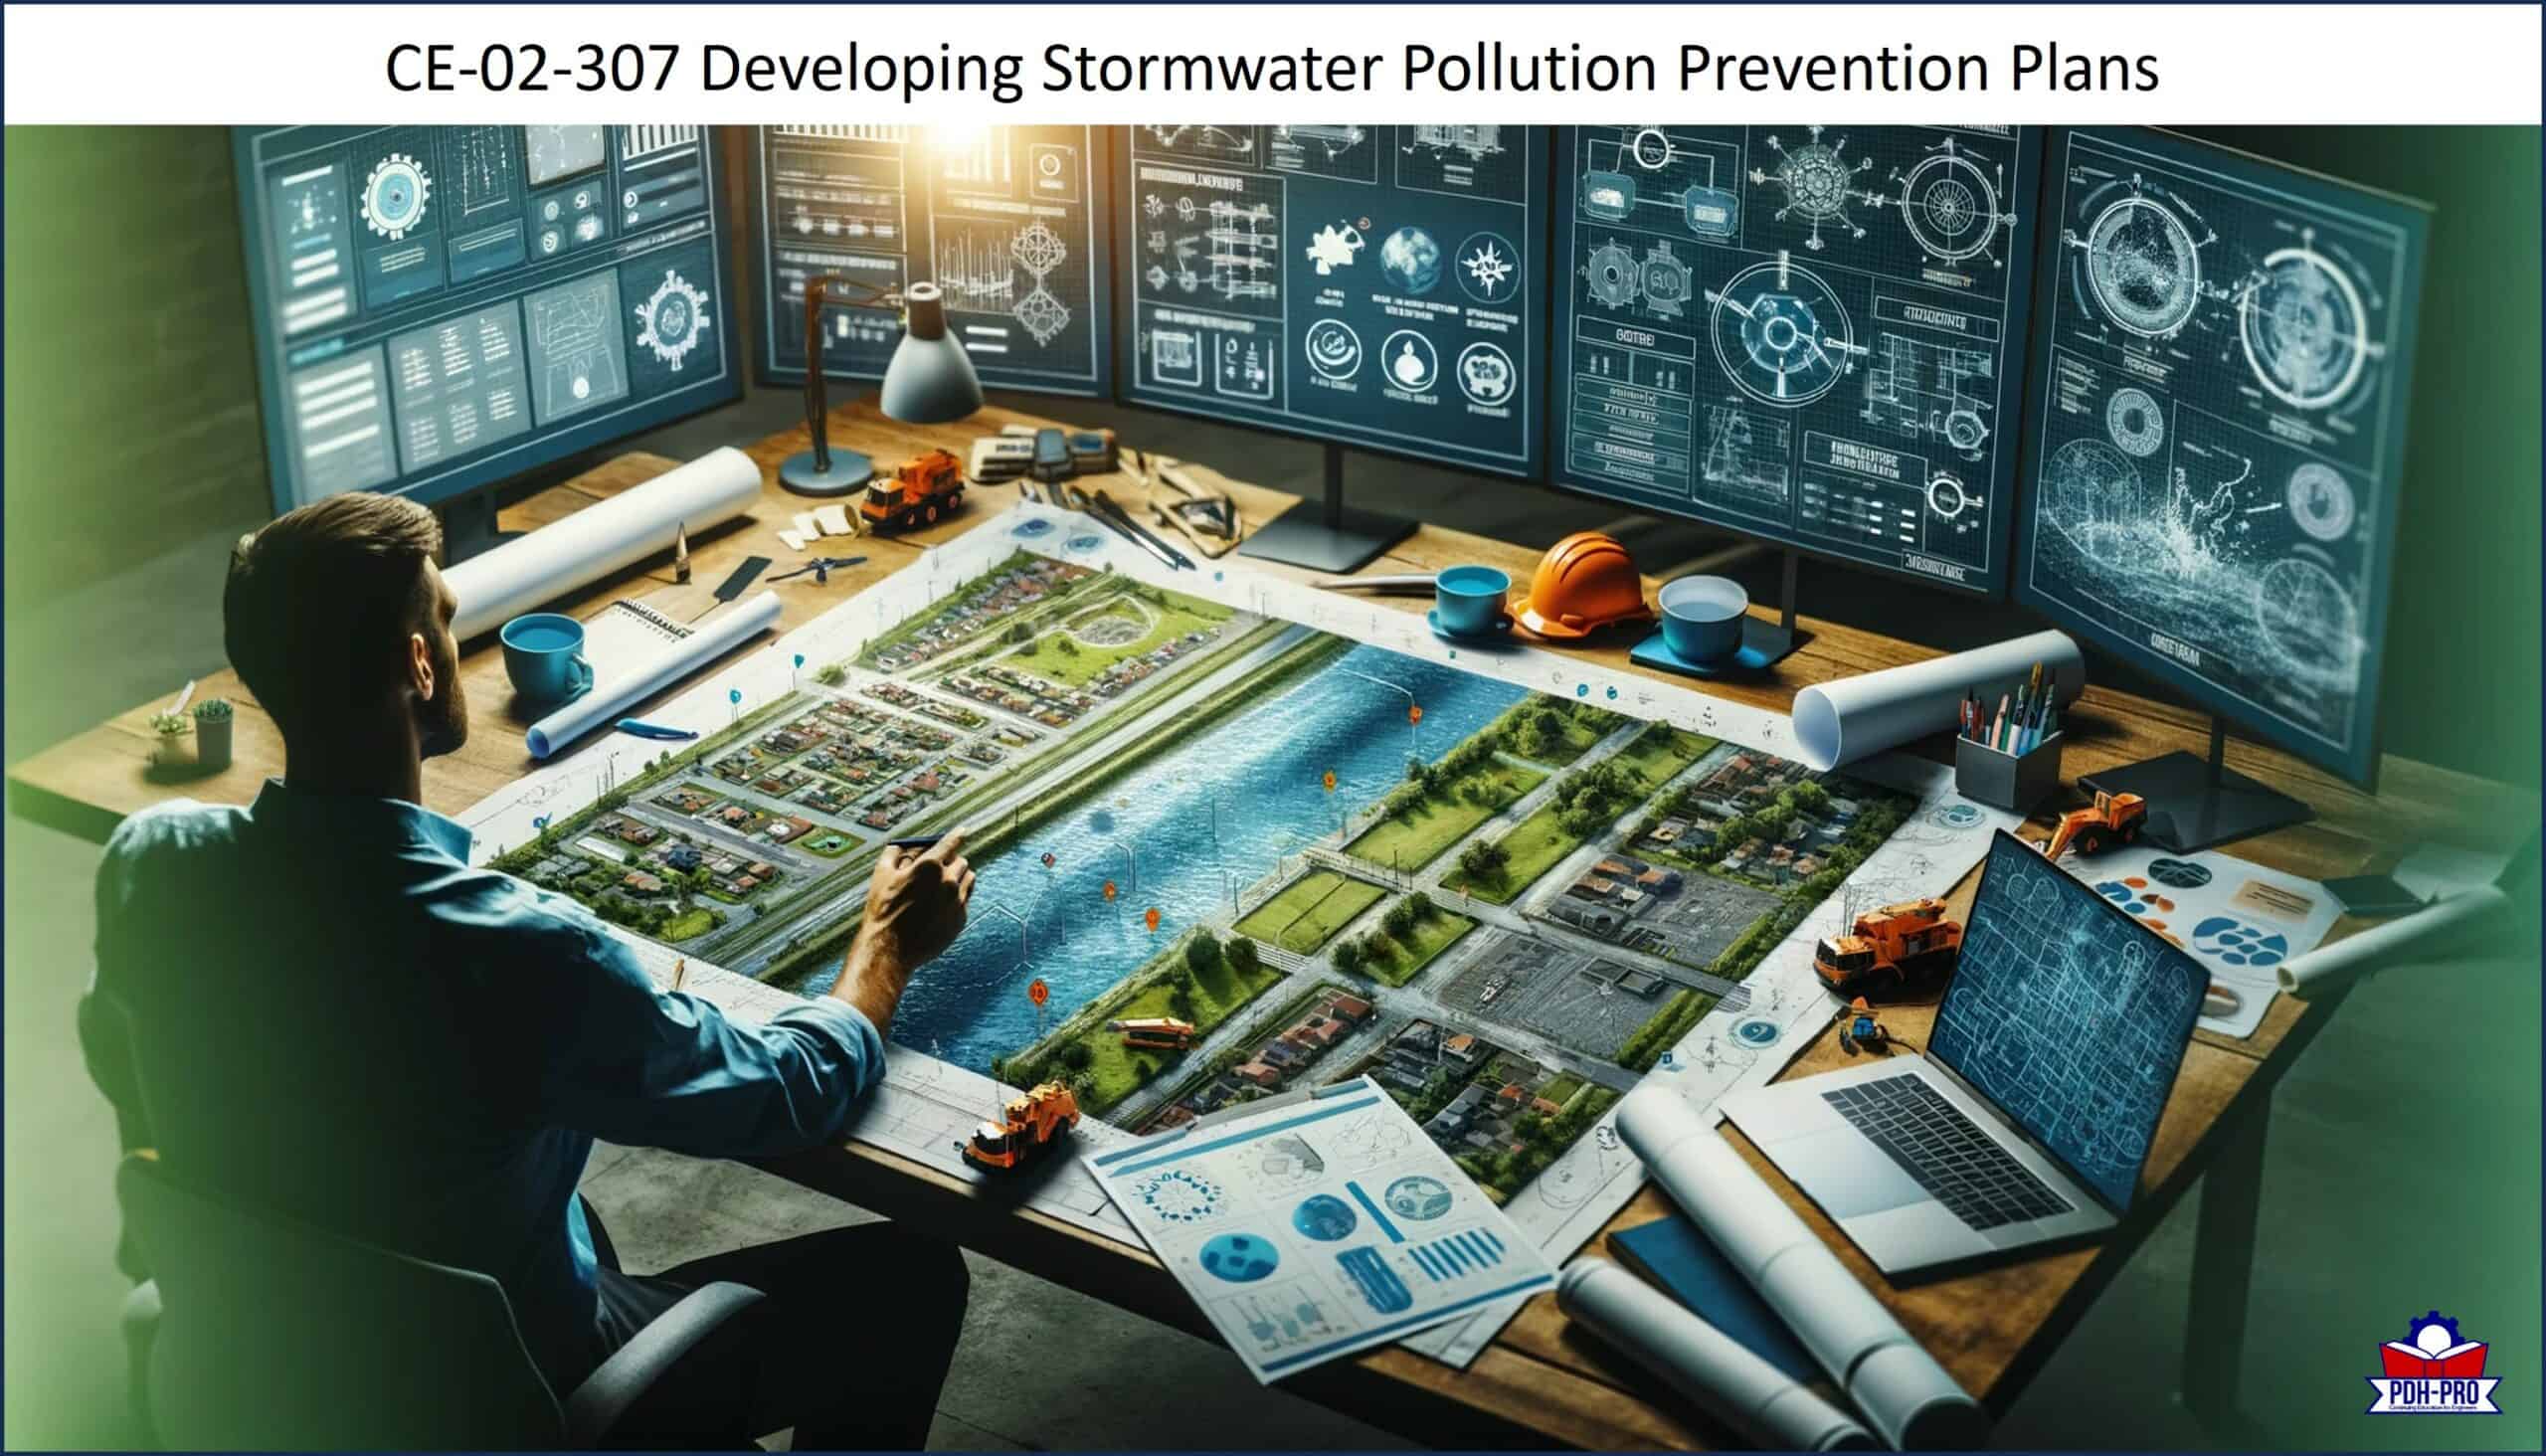 Developing Stormwater Pollution Prevention Plans